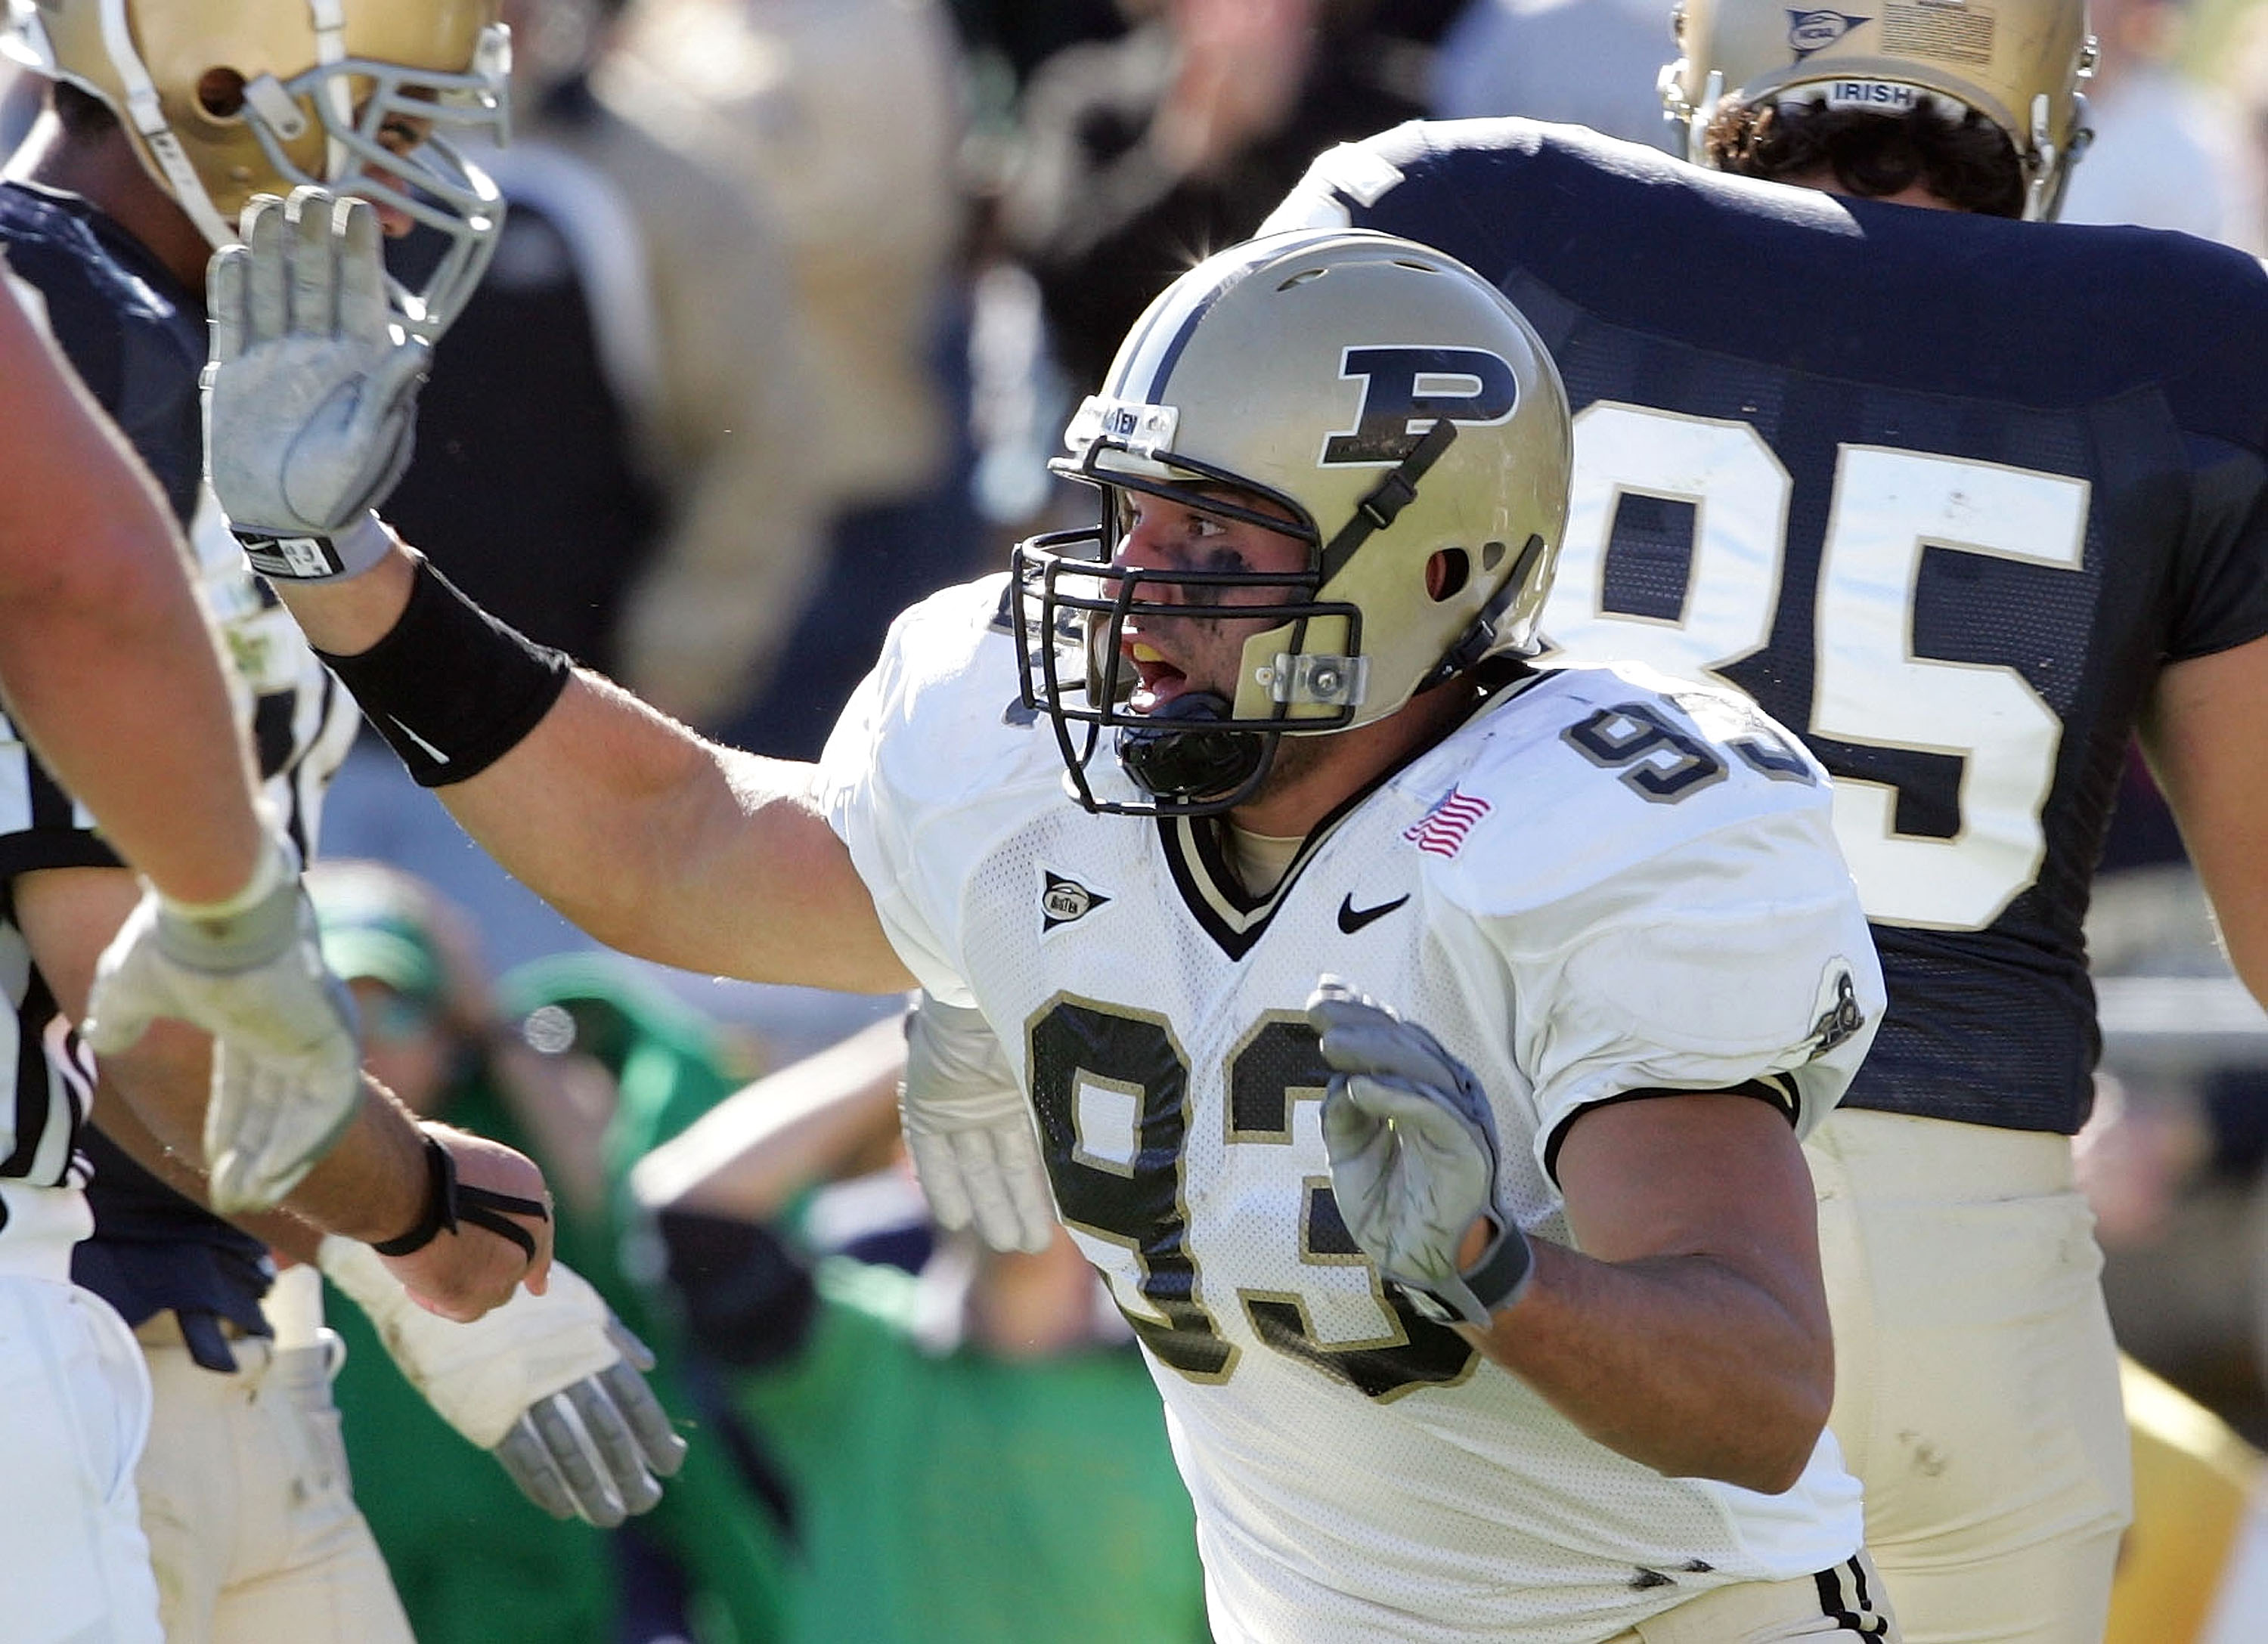 Patriots defensive end Rob Ninkovich during his playing days at Purdue. (Photo by Elsa/Getty Images)